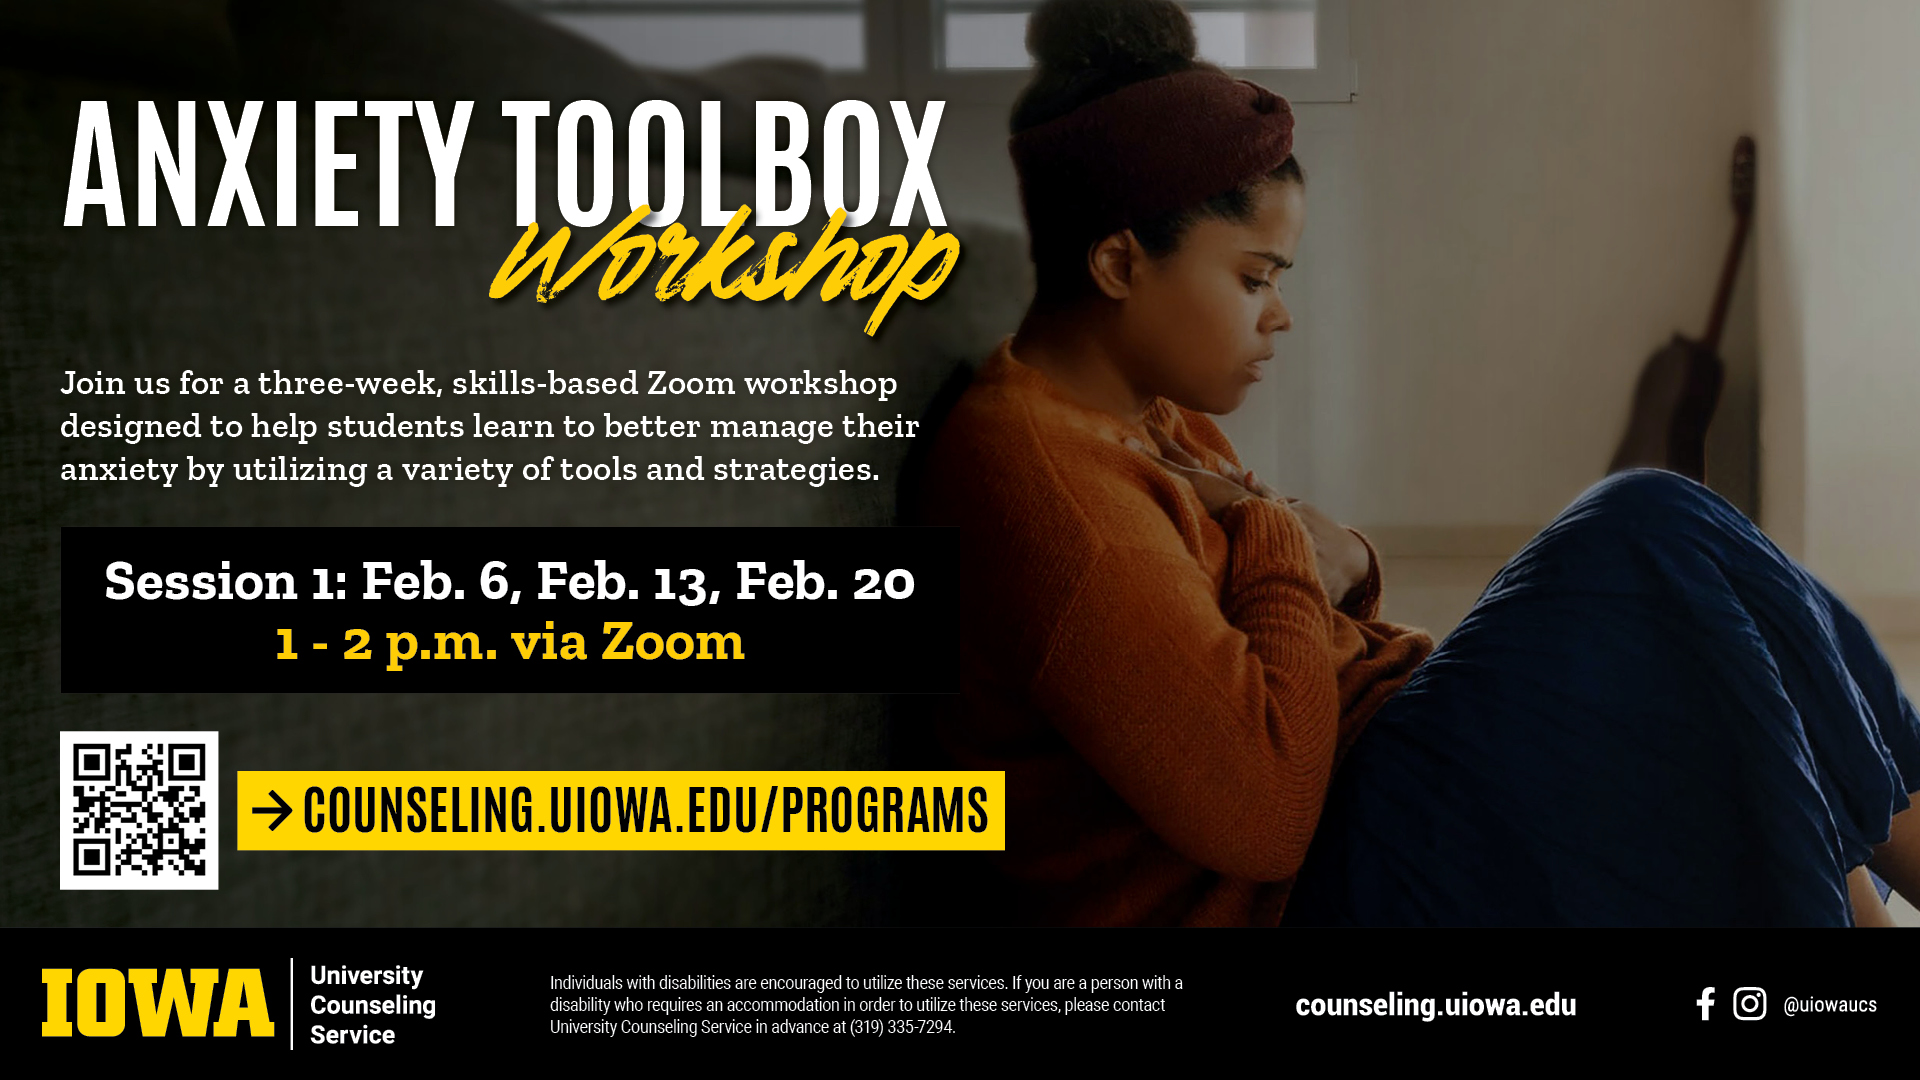 Anxiety Toolbox Workshop Session 1: Feb 6, 13, and 20 1-2pm via zoom counseling.uiowa.edu/programs